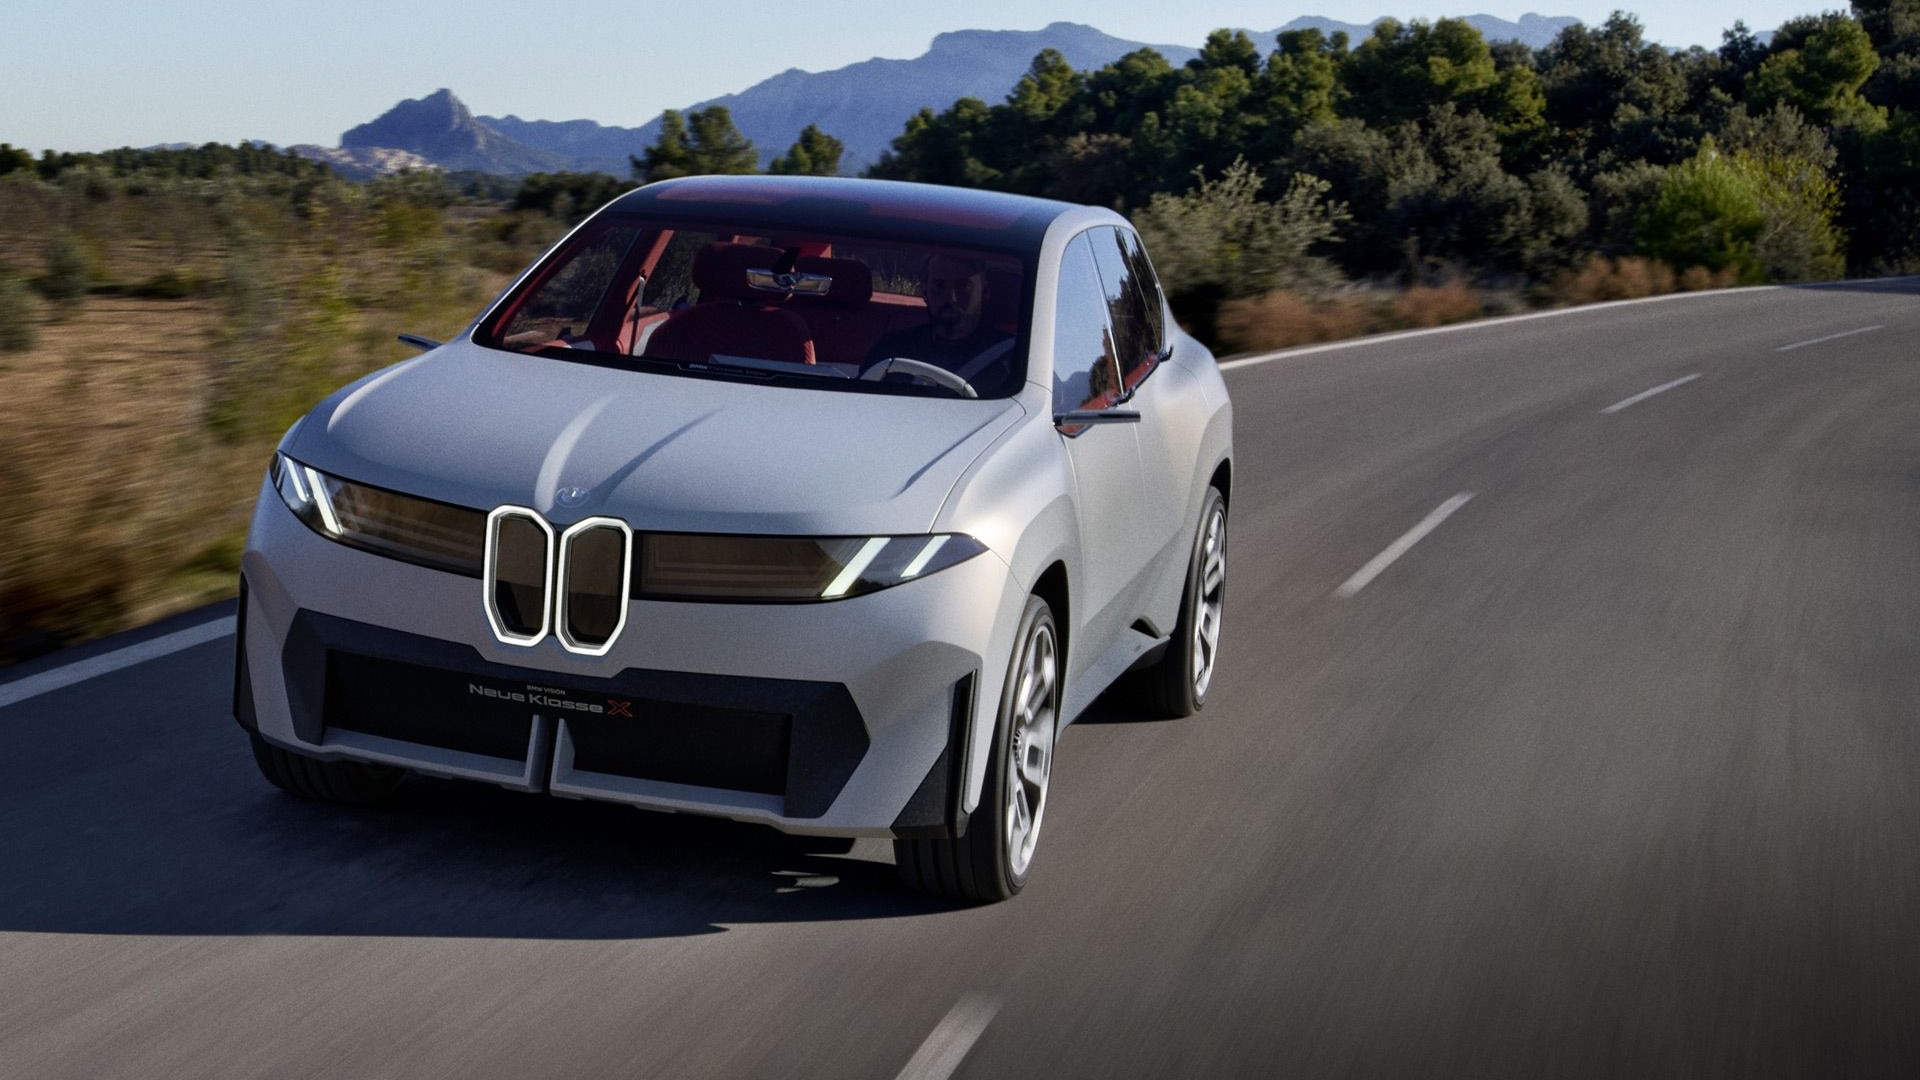 BMW's First Neue Klasse EVs Will Be X3-Sized Crossover, 3 Series-Sized Sedan